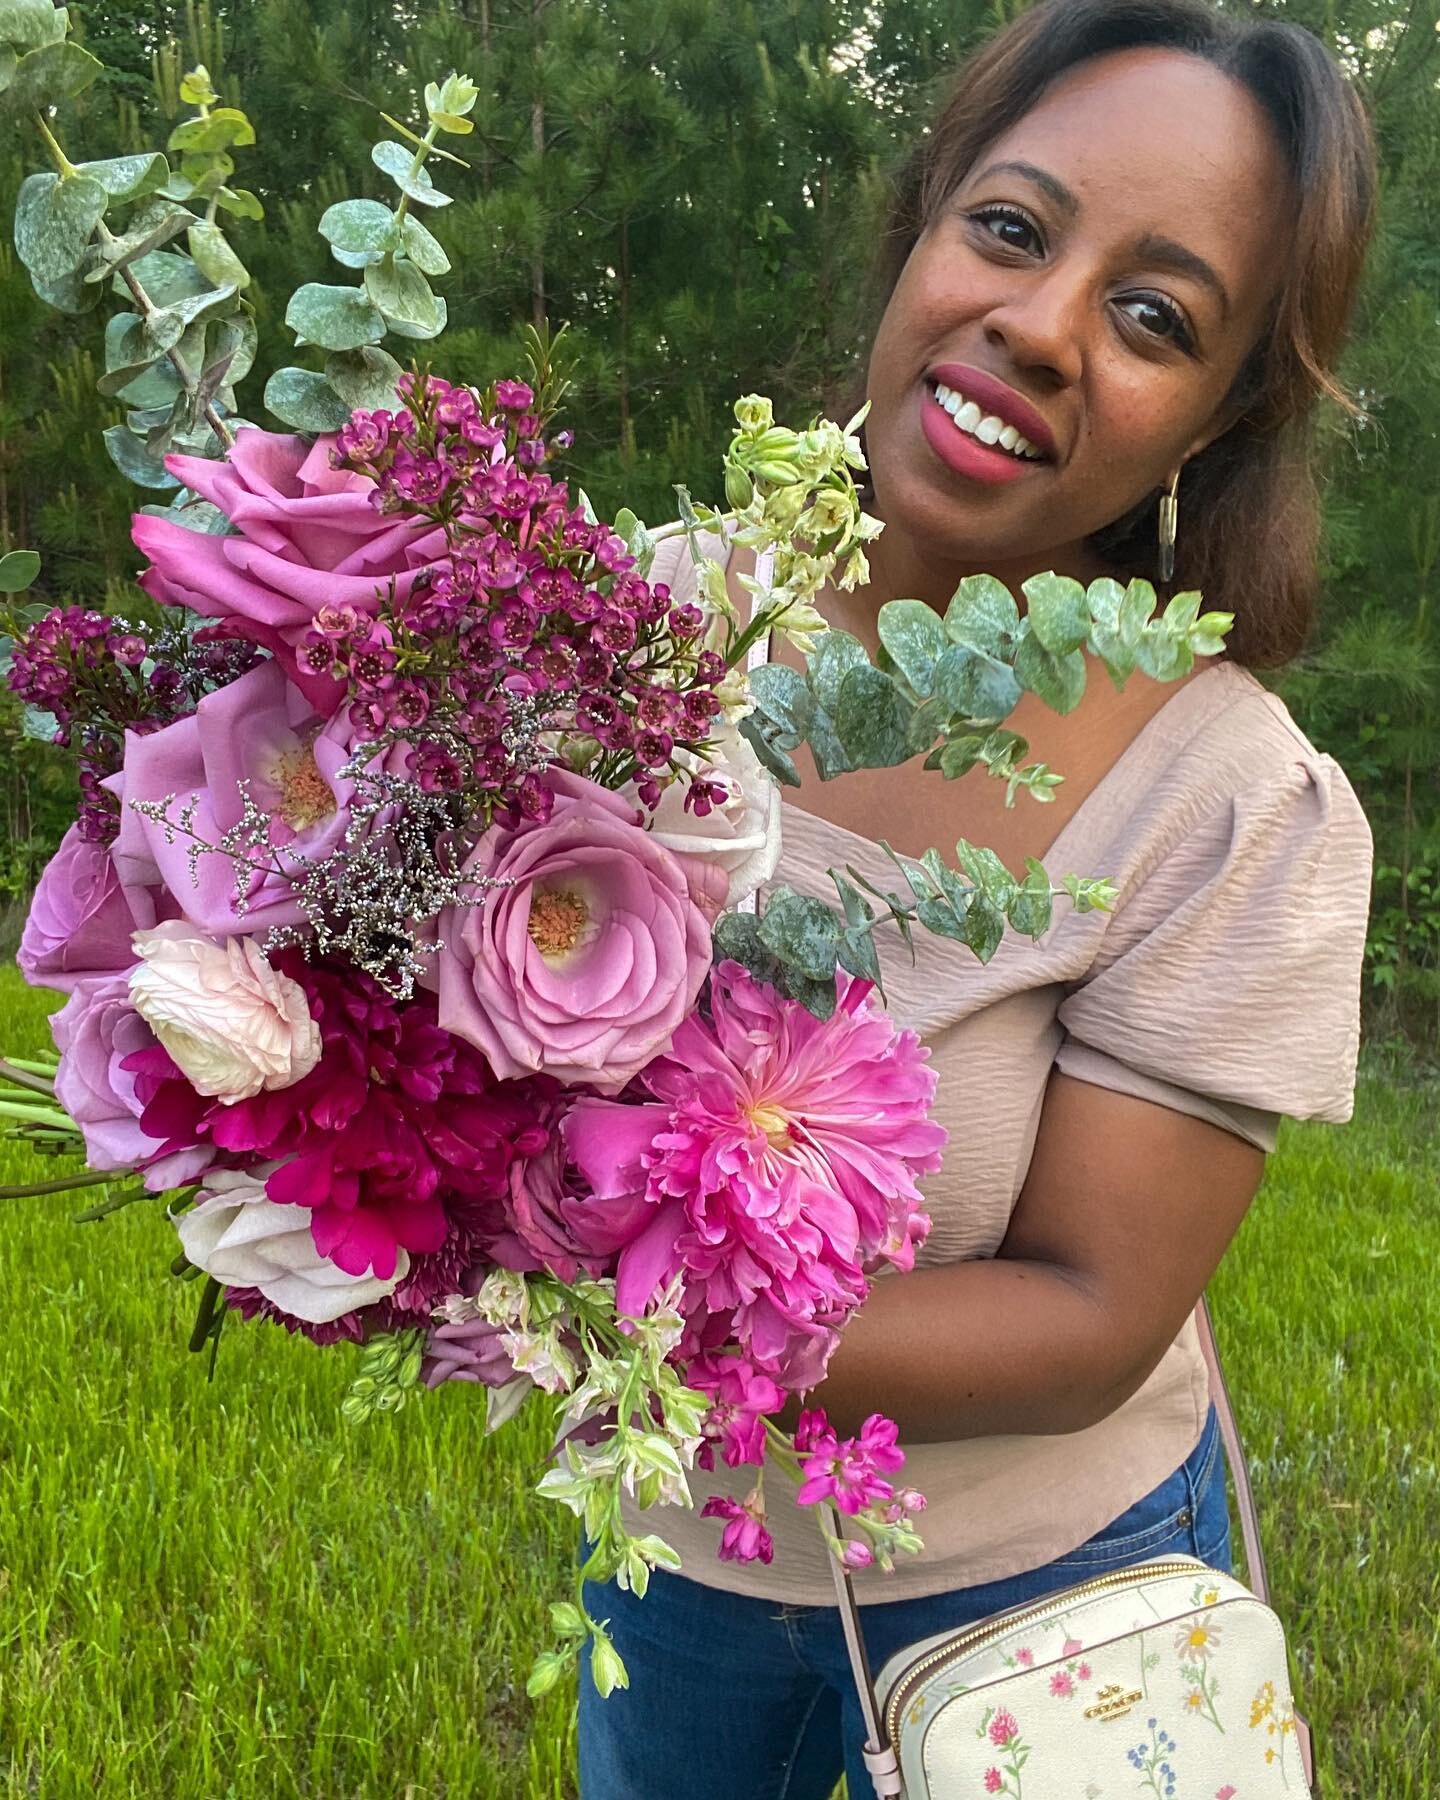 🌿🌸🌷 I&rsquo;m in FULL #mompreneuer mode this weekend. My team and I have ✌🏾 weddings.

It&rsquo;s such a blessing to design pretty florals for our beautiful couples.

🙏🏾 everyone had a lovely + safe weekend!! 

🌸Jazz 

#mompreneurlife #rvaflor